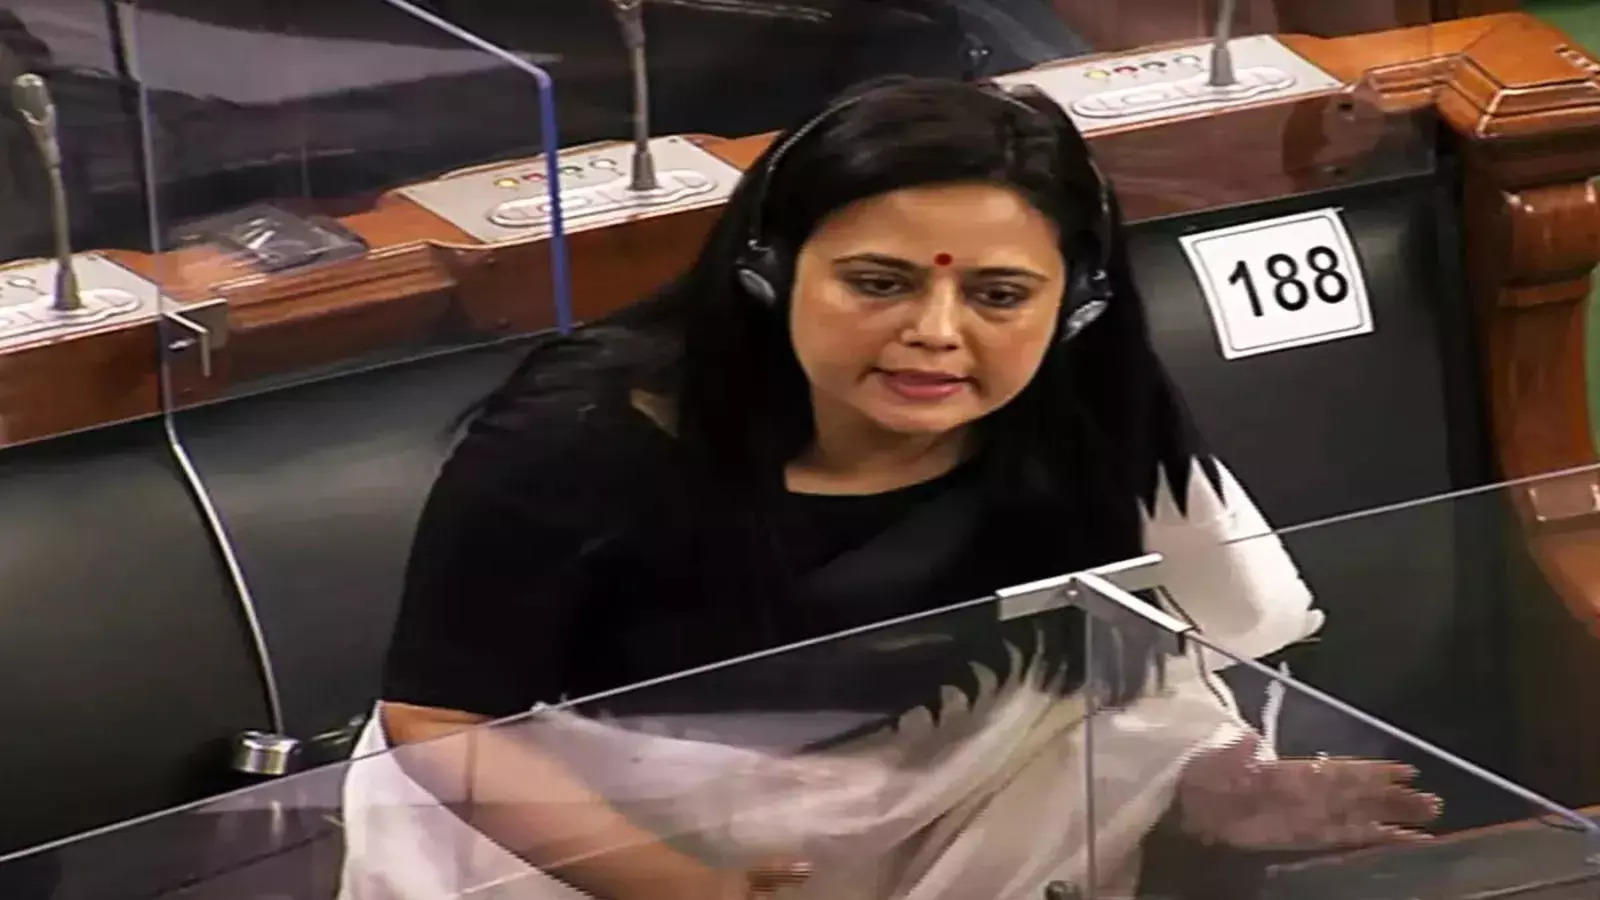 Trinamool Congress MP Mahua Moitra appears before ethics panel in  cash-for-query case - The Hindu